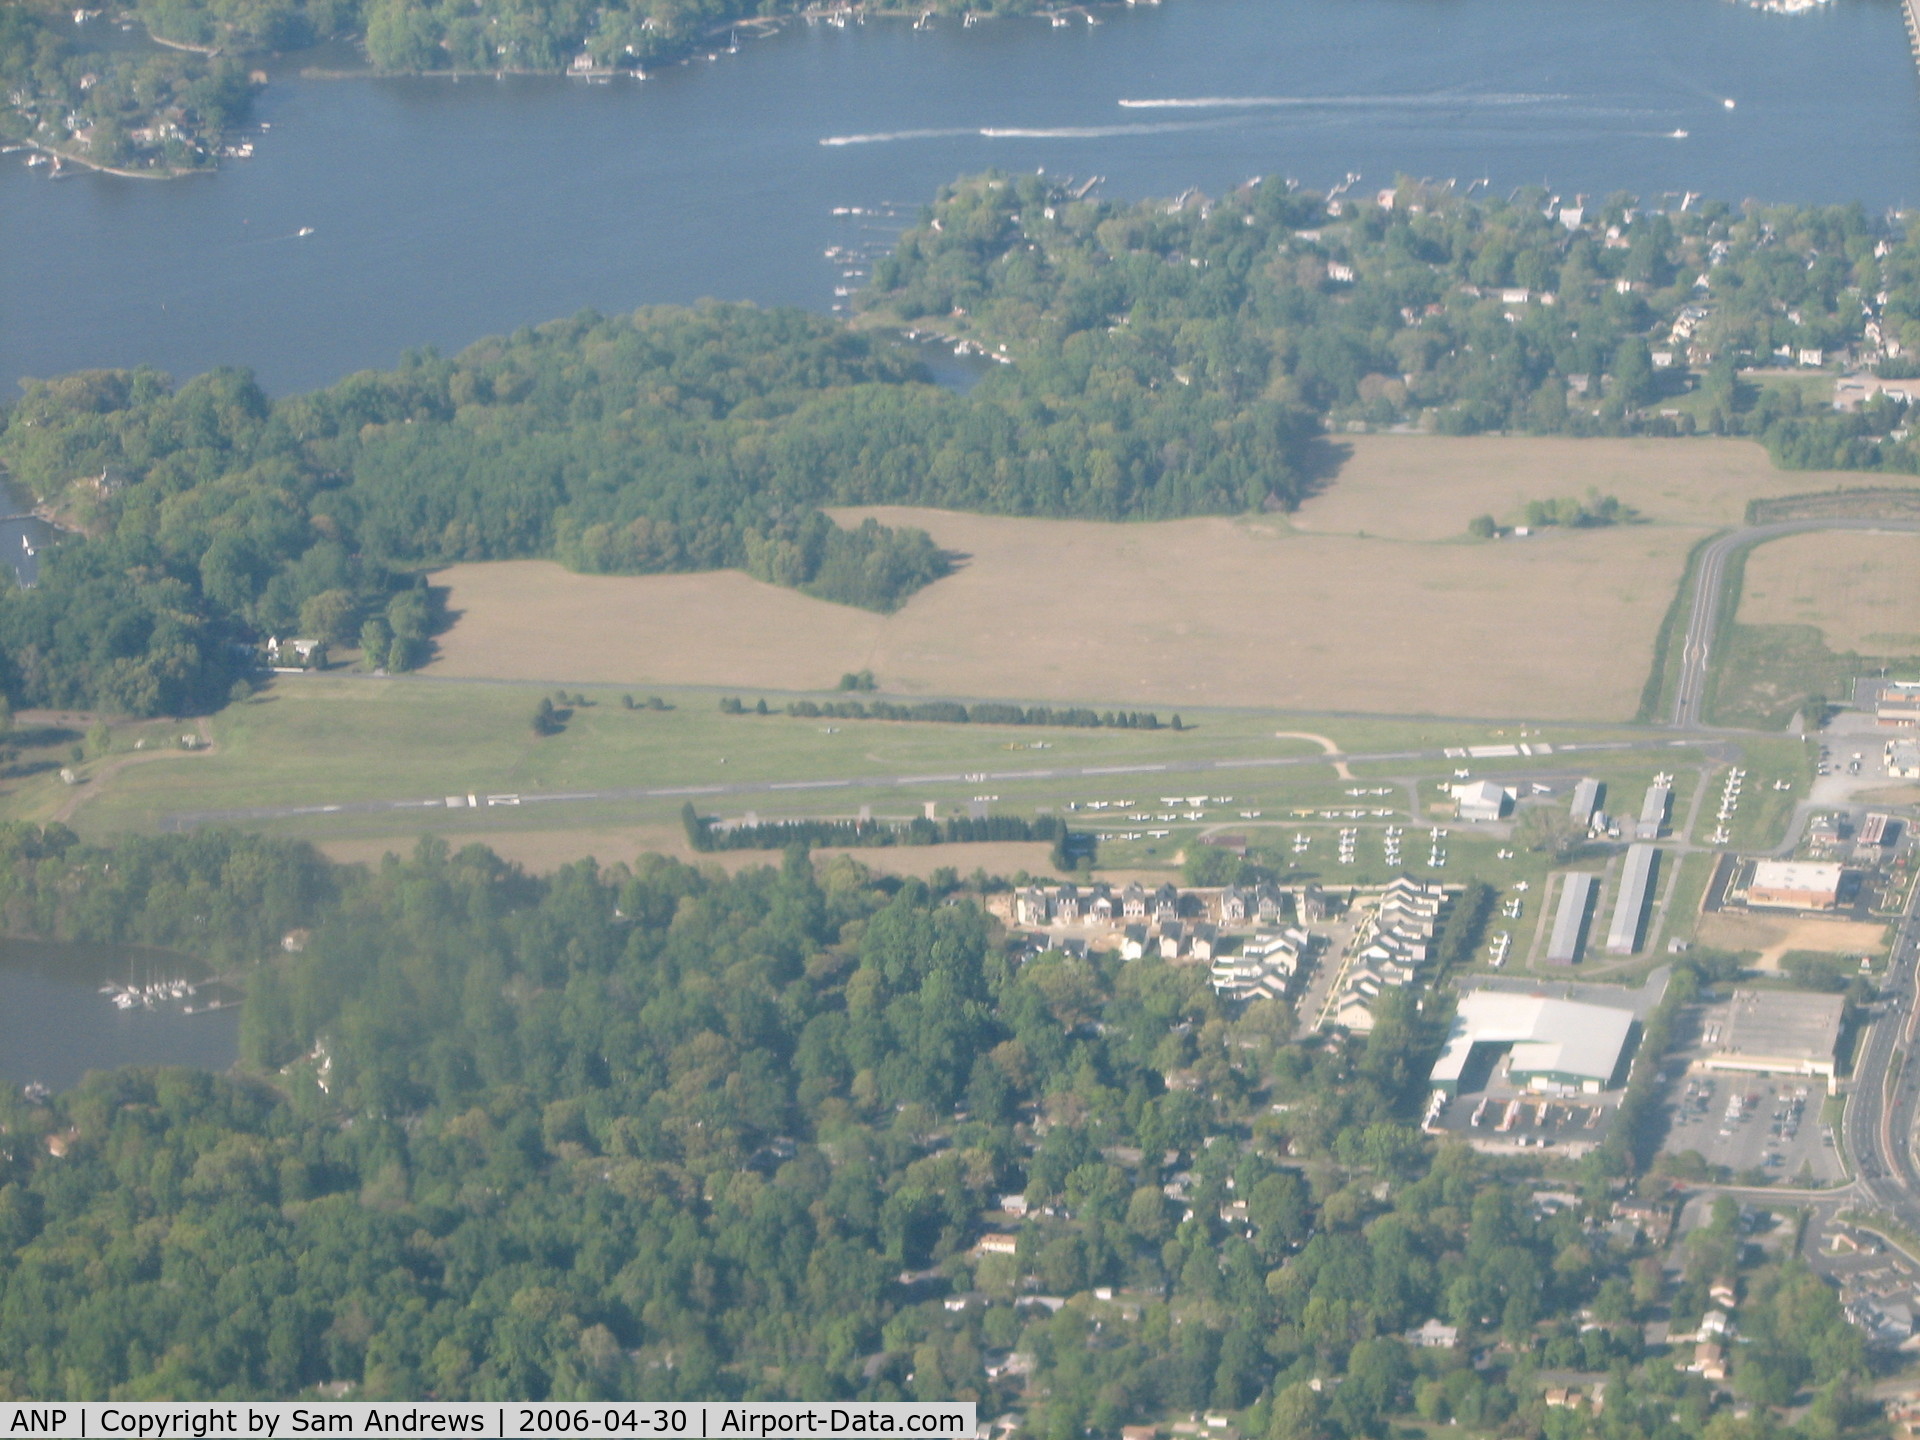 Lee Airport (ANP) - On approach to BWI